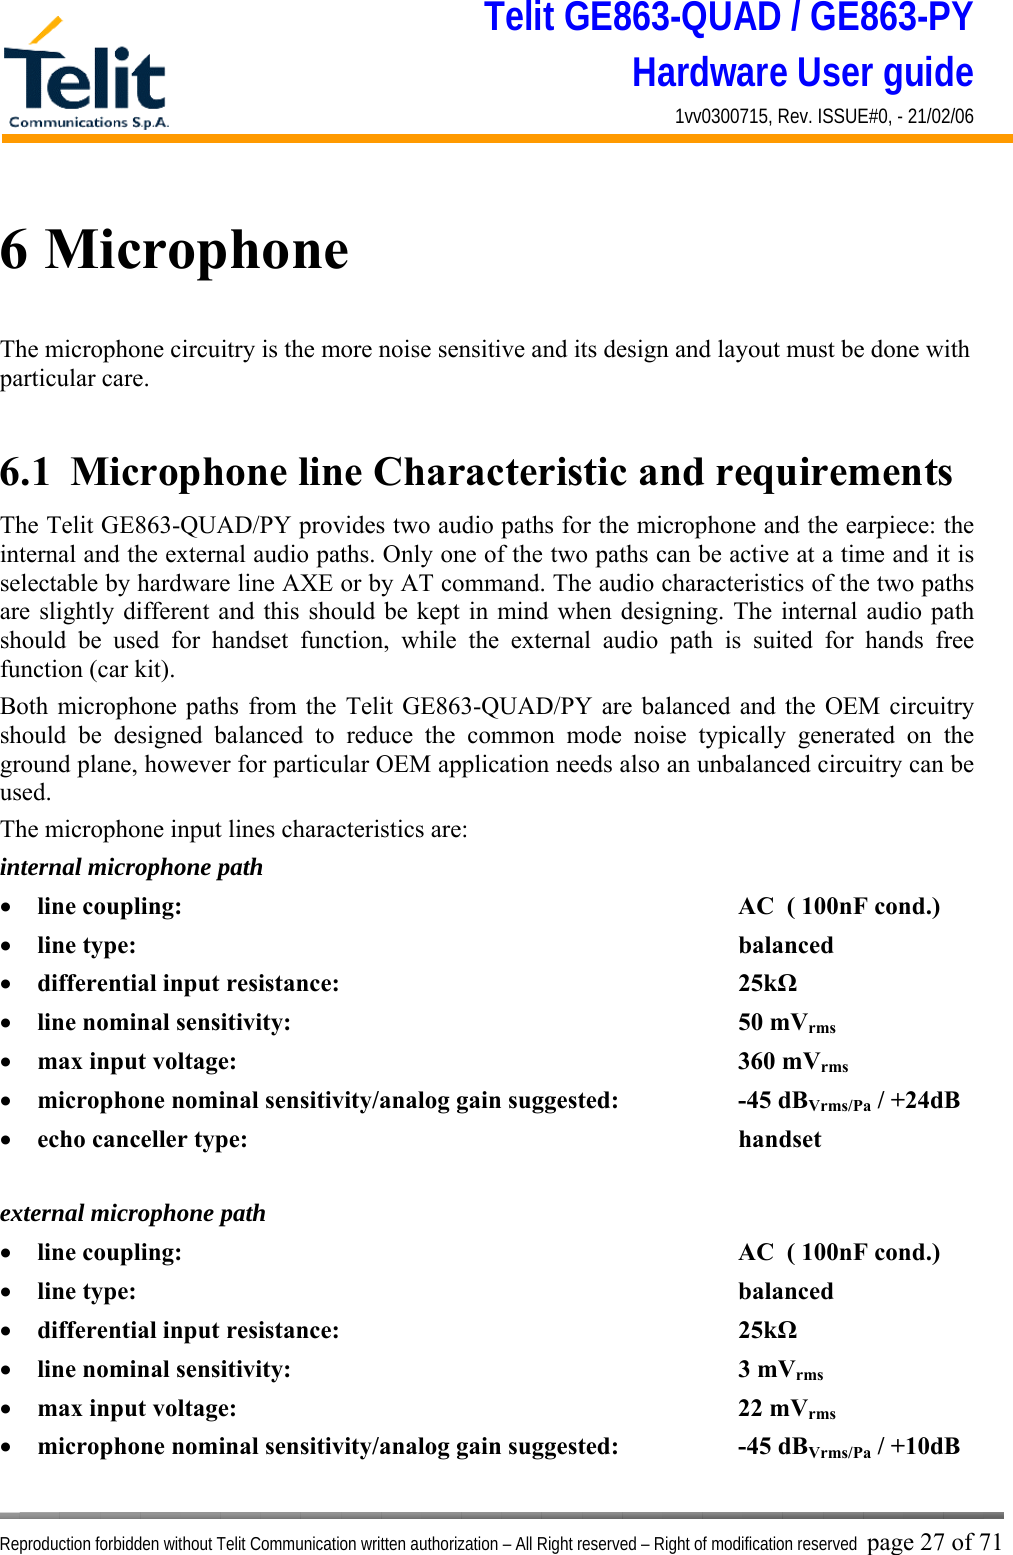 Telit GE863-QUAD / GE863-PY Hardware User guide 1vv0300715, Rev. ISSUE#0, - 21/02/06    Reproduction forbidden without Telit Communication written authorization – All Right reserved – Right of modification reserved page 27 of 71 6 Microphone The microphone circuitry is the more noise sensitive and its design and layout must be done with particular care.  6.1  Microphone line Characteristic and requirements The Telit GE863-QUAD/PY provides two audio paths for the microphone and the earpiece: the internal and the external audio paths. Only one of the two paths can be active at a time and it is selectable by hardware line AXE or by AT command. The audio characteristics of the two paths are slightly different and this should be kept in mind when designing. The internal audio path should be used for handset function, while the external audio path is suited for hands free function (car kit). Both microphone paths from the Telit GE863-QUAD/PY are balanced and the OEM circuitry should be designed balanced to reduce the common mode noise typically generated on the ground plane, however for particular OEM application needs also an unbalanced circuitry can be used. The microphone input lines characteristics are: internal microphone path •  line coupling:        AC  ( 100nF cond.) •  line type:         balanced •  differential input resistance:      25kΩ •  line nominal sensitivity:       50 mVrms •  max input voltage:       360 mVrms •  microphone nominal sensitivity/analog gain suggested:    -45 dBVrms/Pa / +24dB •  echo canceller type:       handset  external microphone path •  line coupling:        AC  ( 100nF cond.) •  line type:         balanced •  differential input resistance:      25kΩ •  line nominal sensitivity:       3 mVrms •  max input voltage:       22 mVrms •  microphone nominal sensitivity/analog gain suggested:    -45 dBVrms/Pa / +10dB 